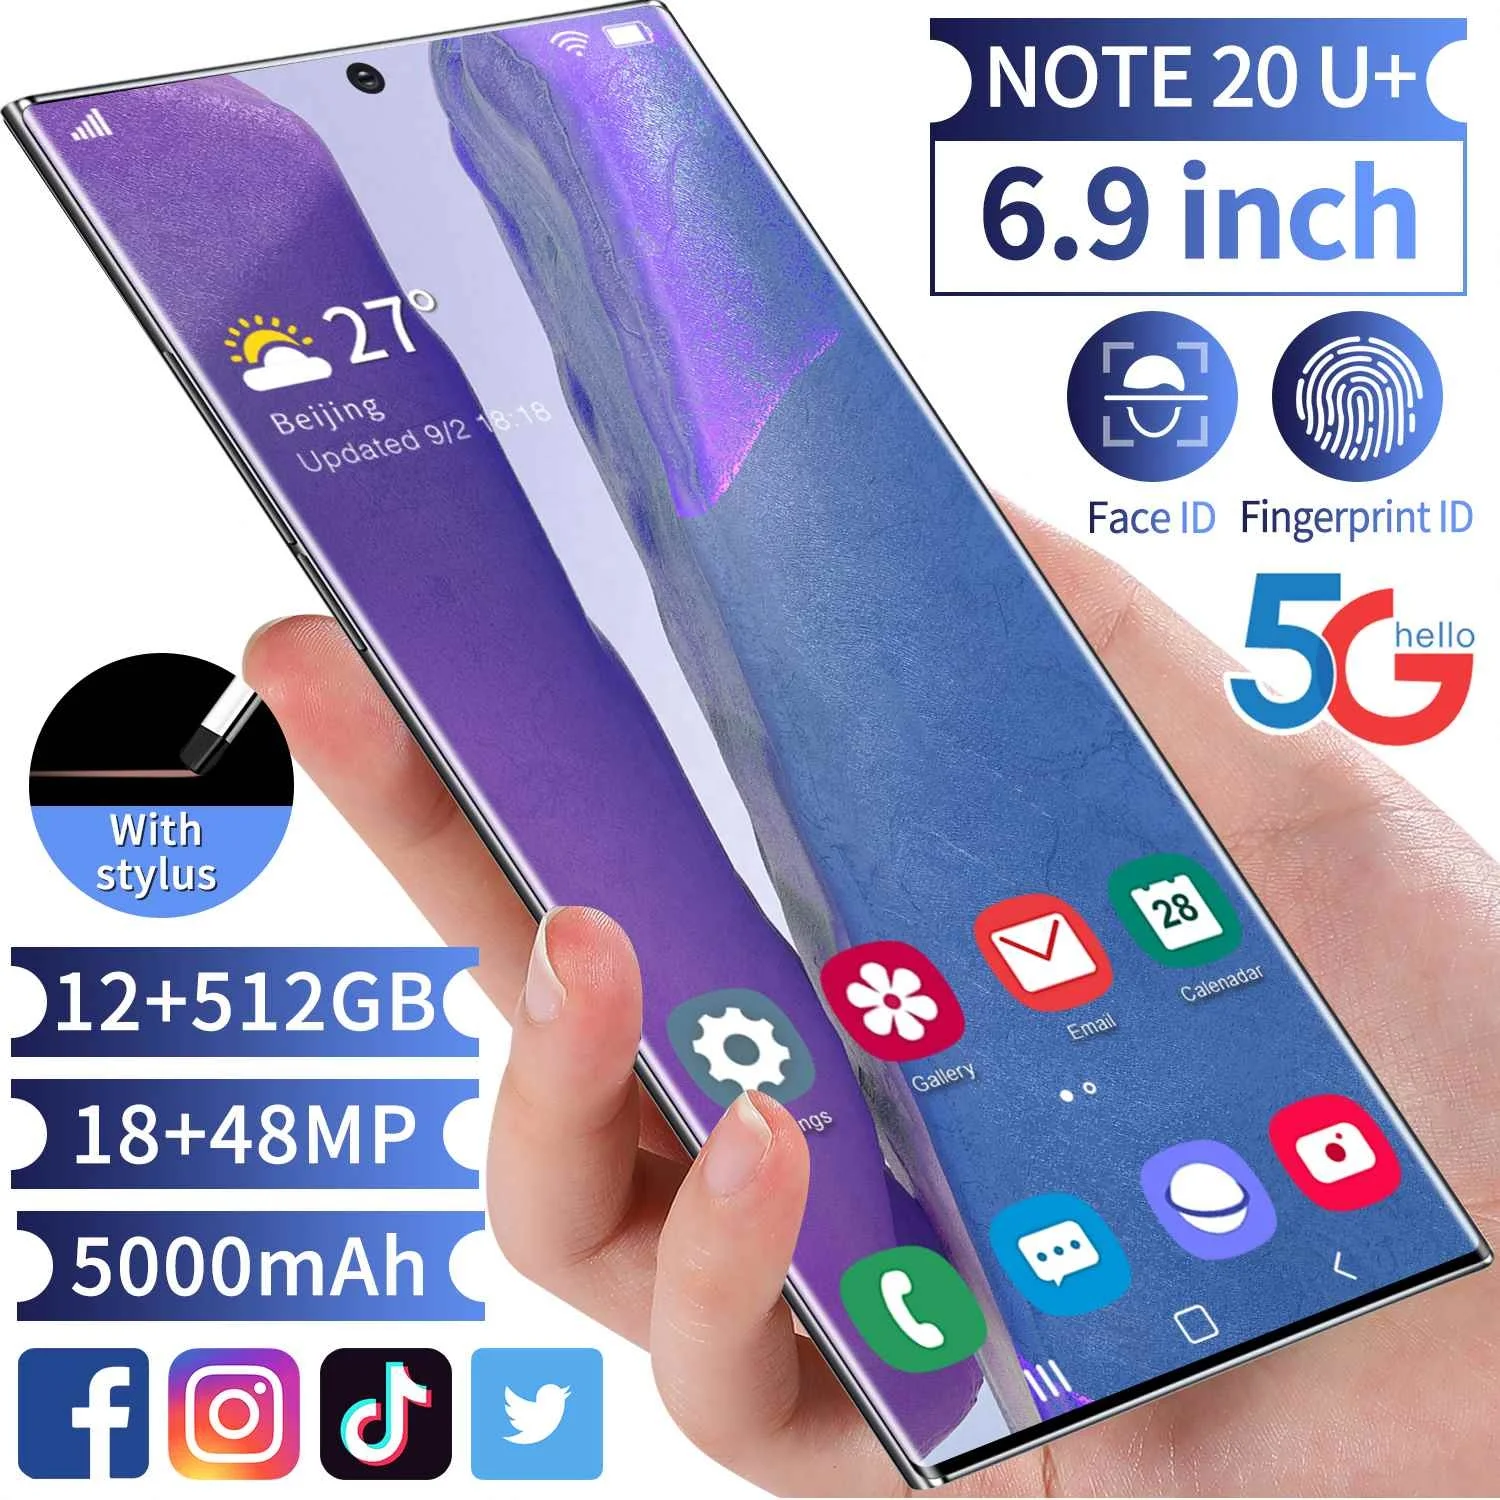 

12GB+512GB Note 20U+ Smartphone 6.9Inch AMOLED Screen Android 10.0 Telephone Smartphone With Face Unlock, Colors